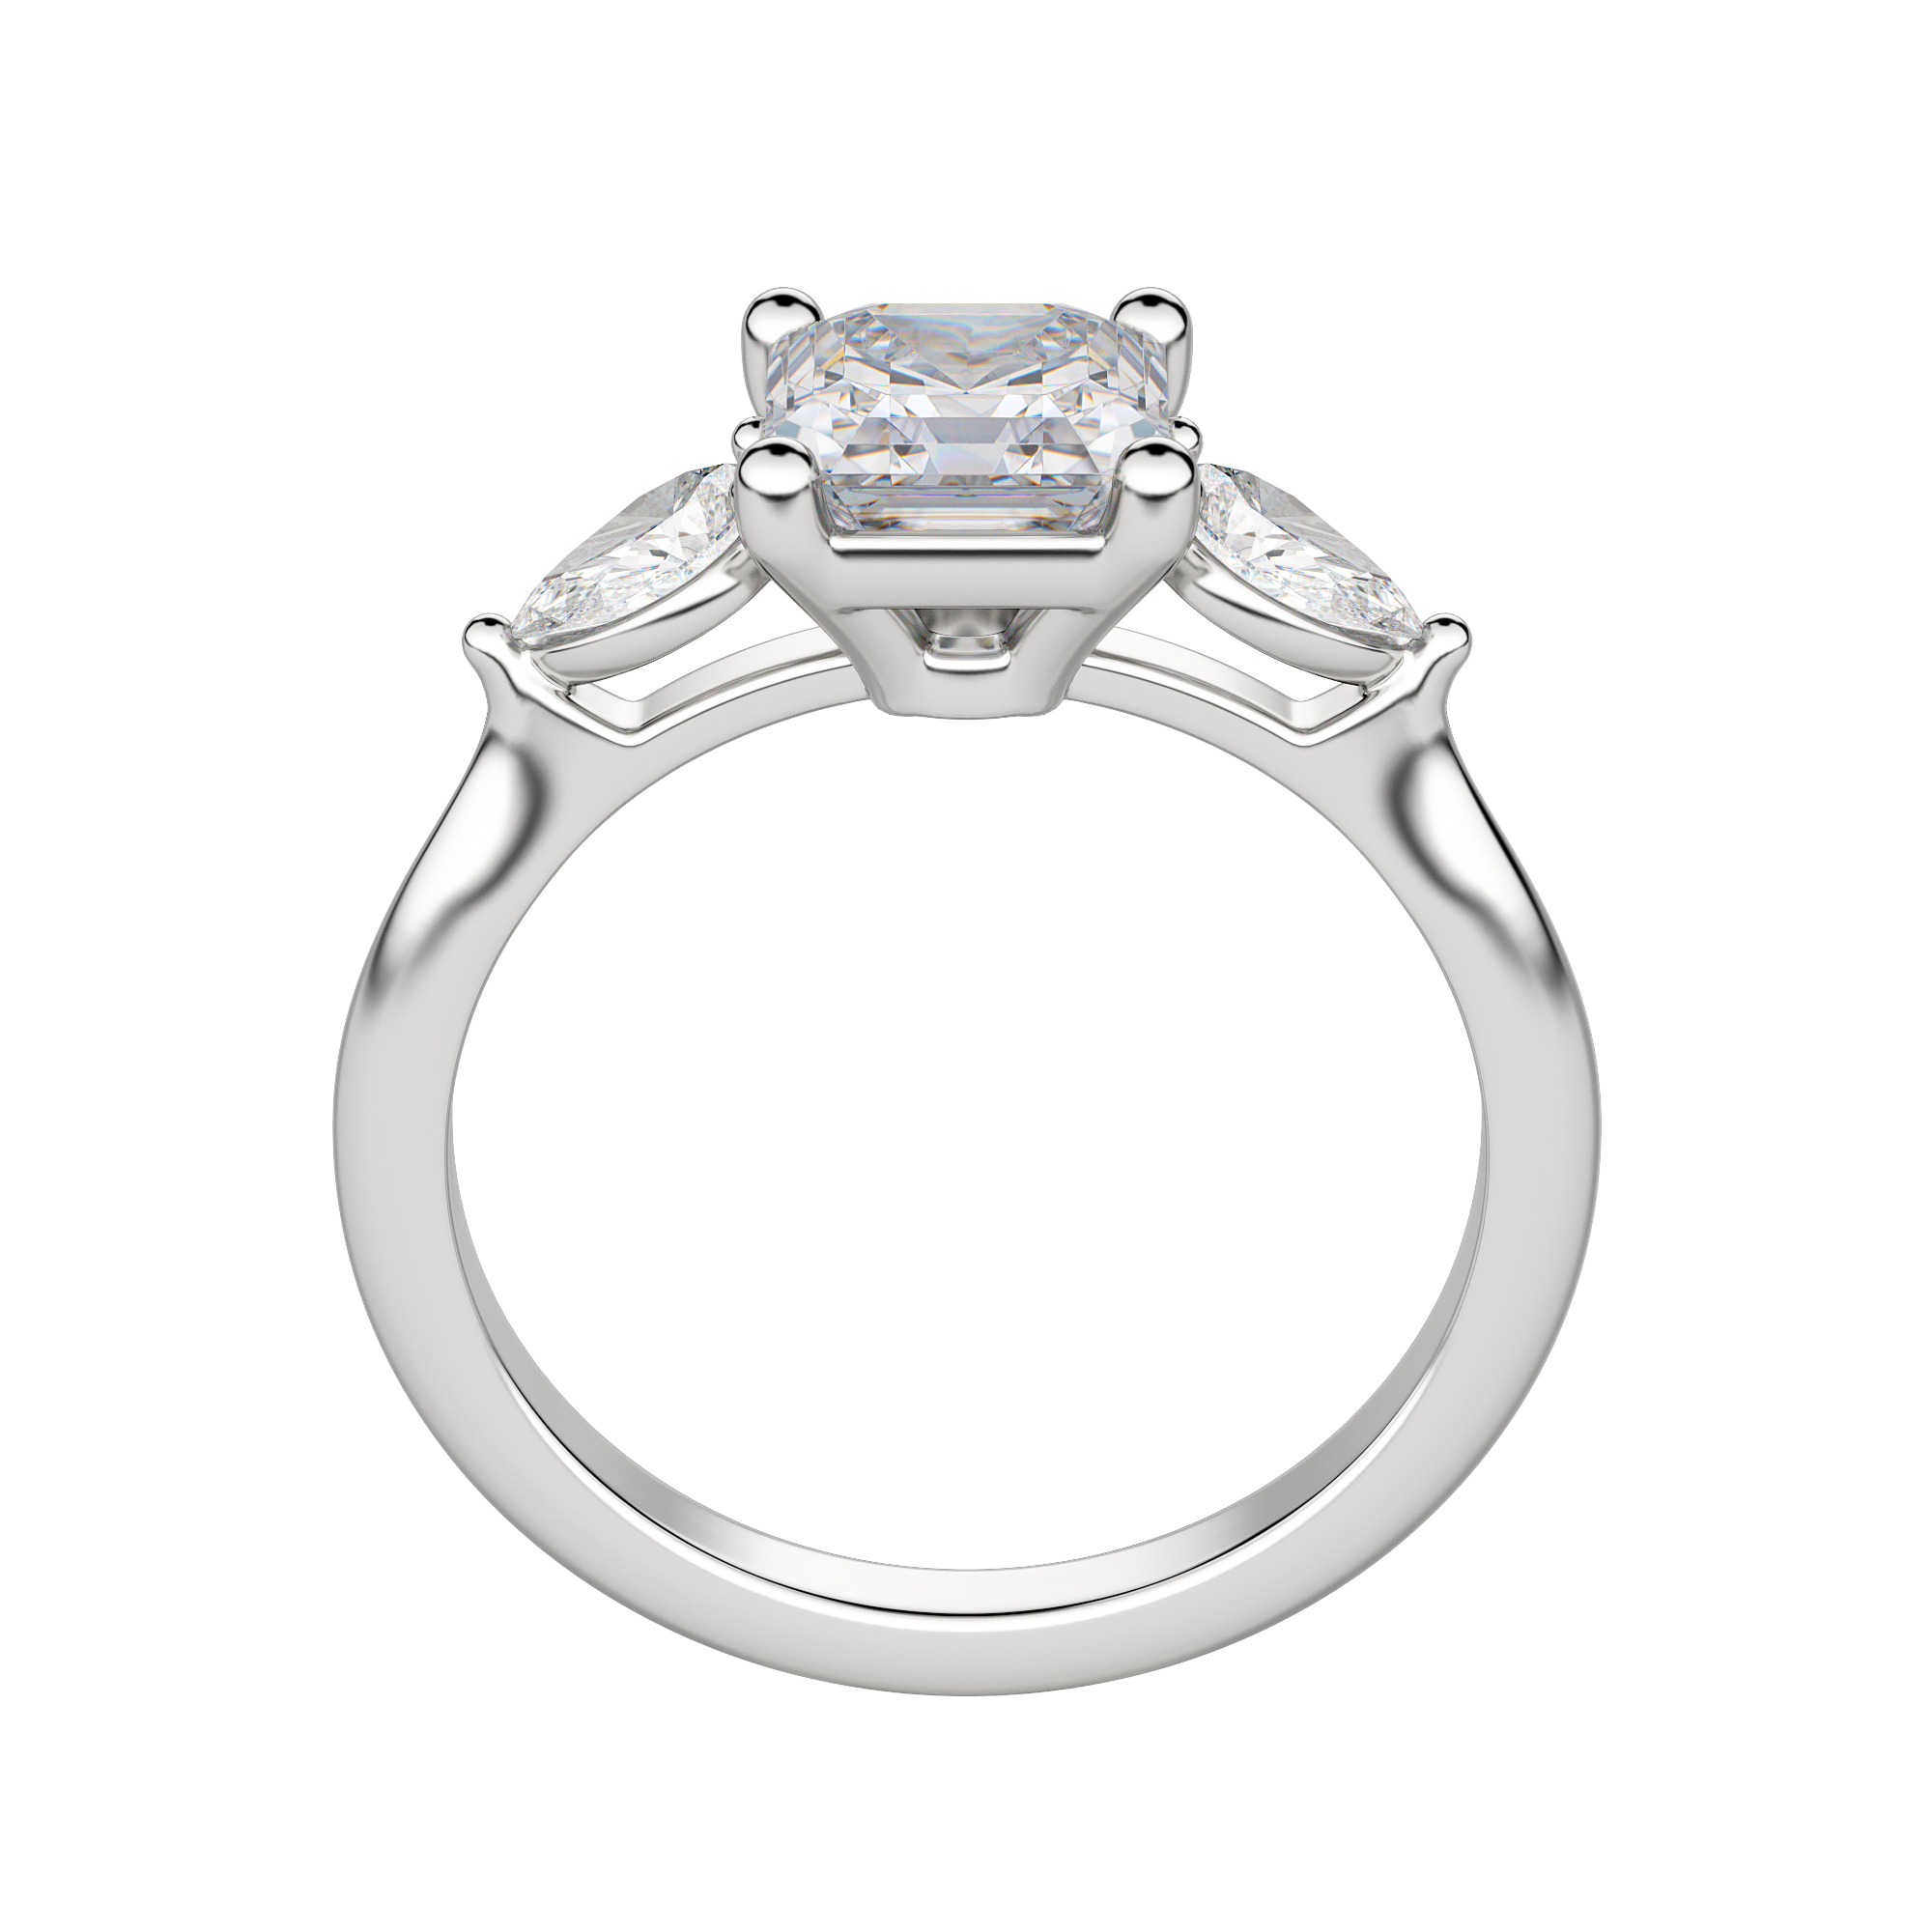 Lily Classic Asscher Cut Engagement Ring, Hover, Platinum, 18K White Gold, 